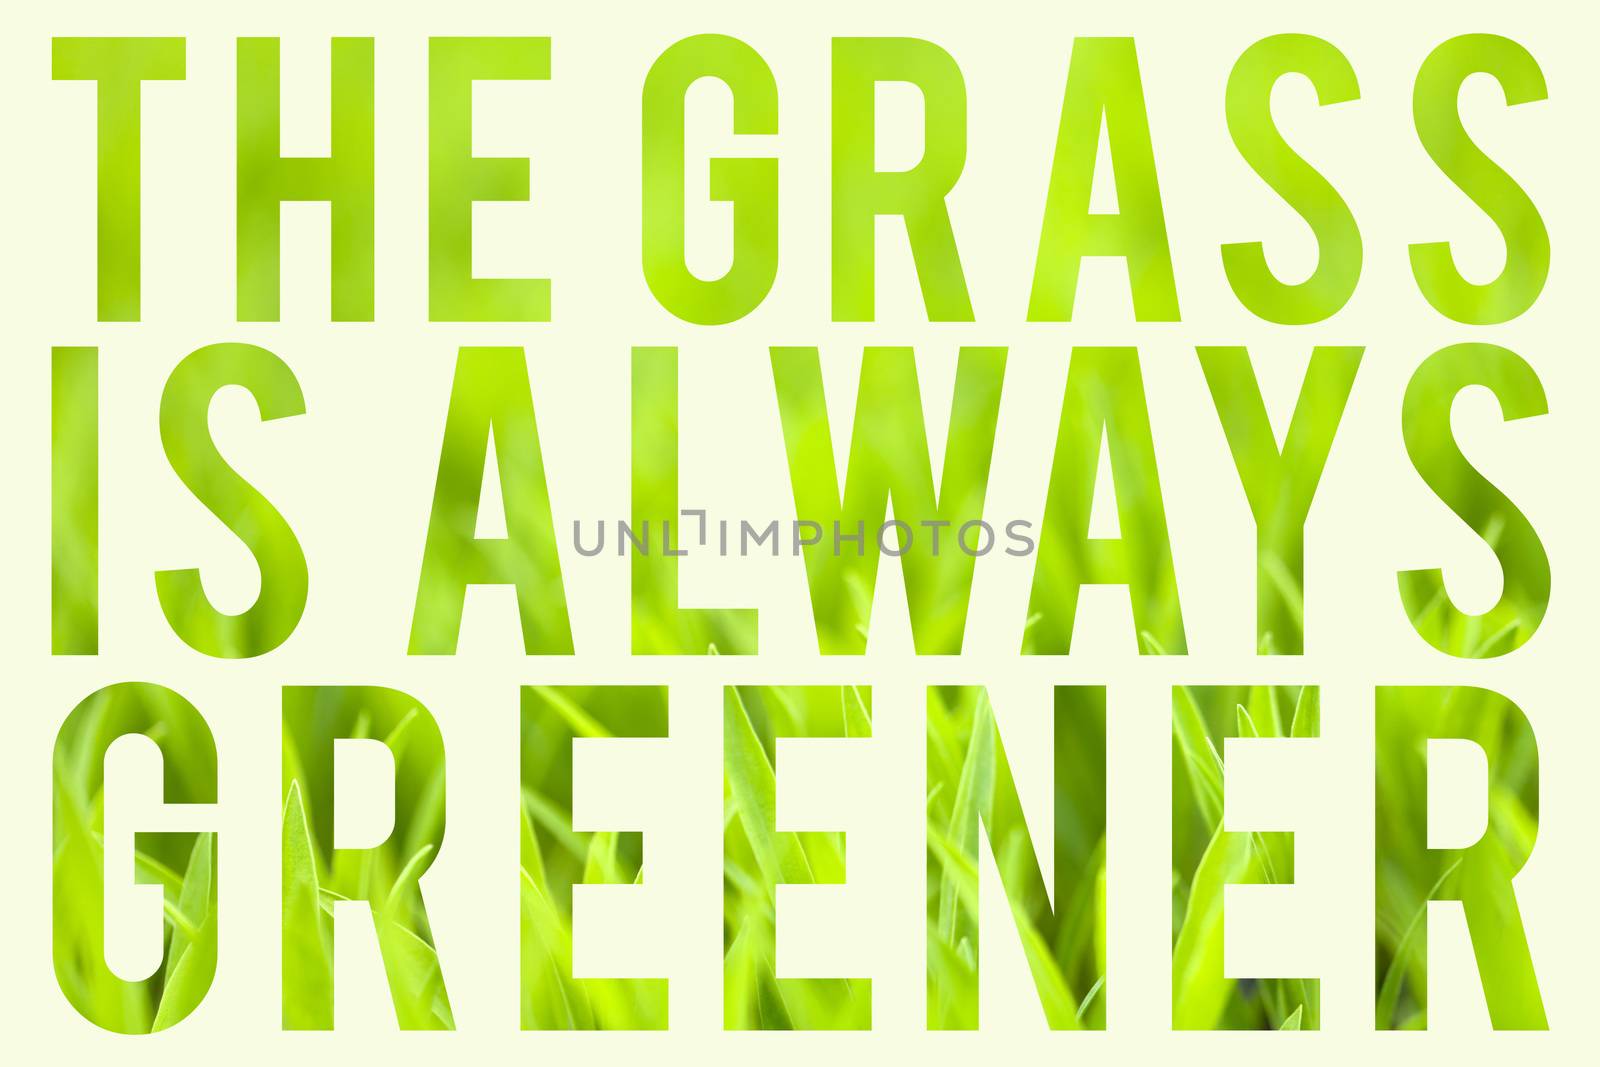 Green grass with typography quote about the grass always being greener on the other side.